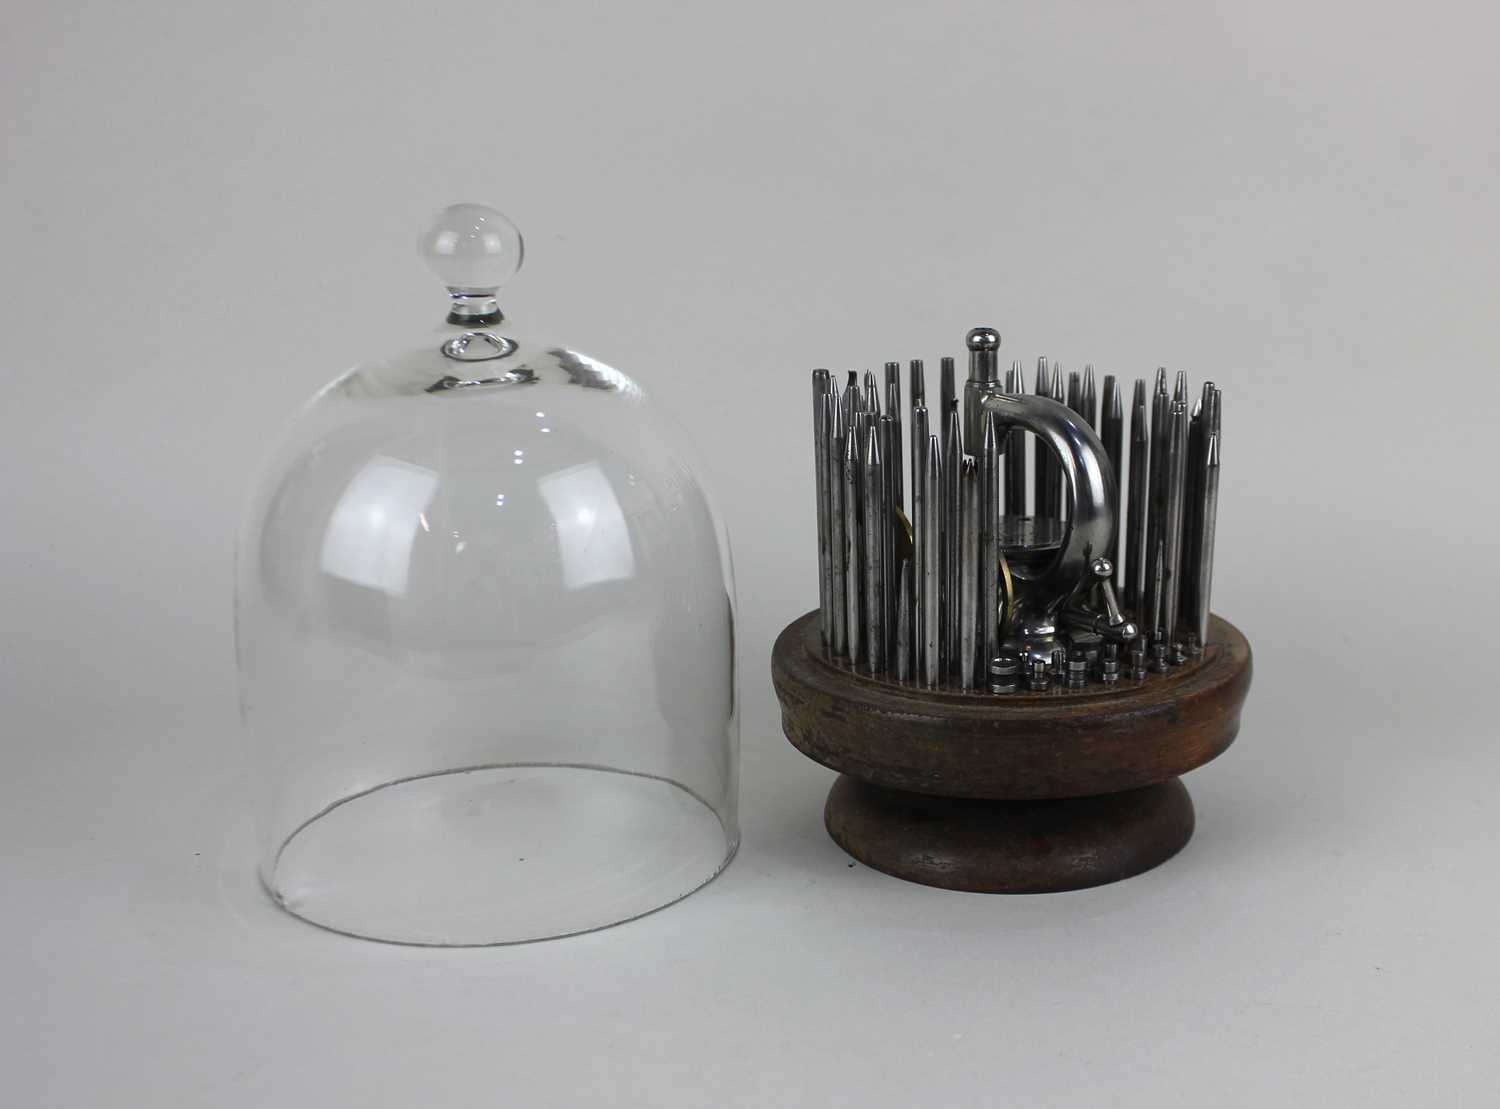 A watchmaker's rivett staking tool set on wooden stand under a glass cloche (cloche replaced)